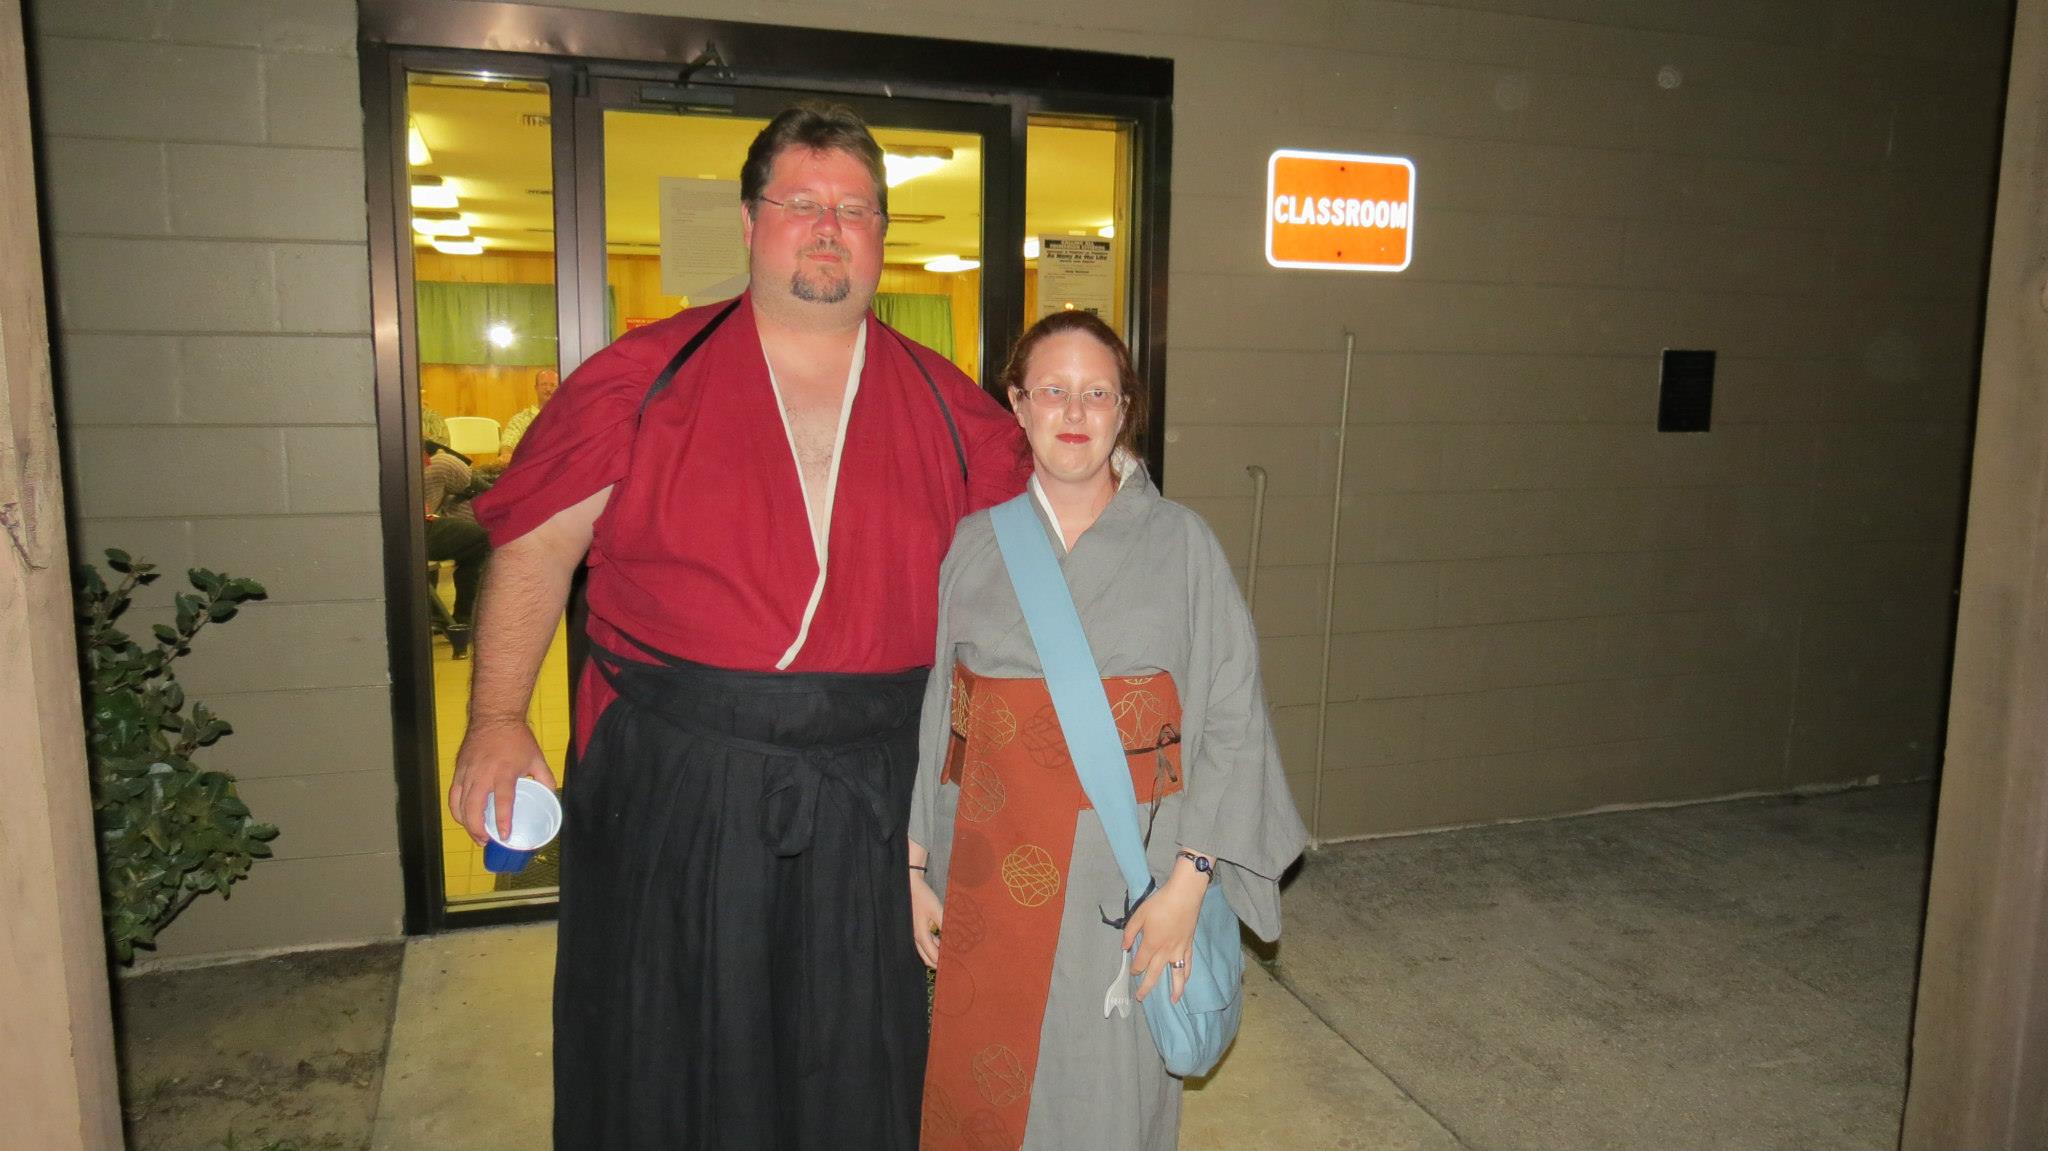 Elizabeth, My husband and I do re-enactment with the Society for Creative Anachronism (SCA) and have 1580s Jap...